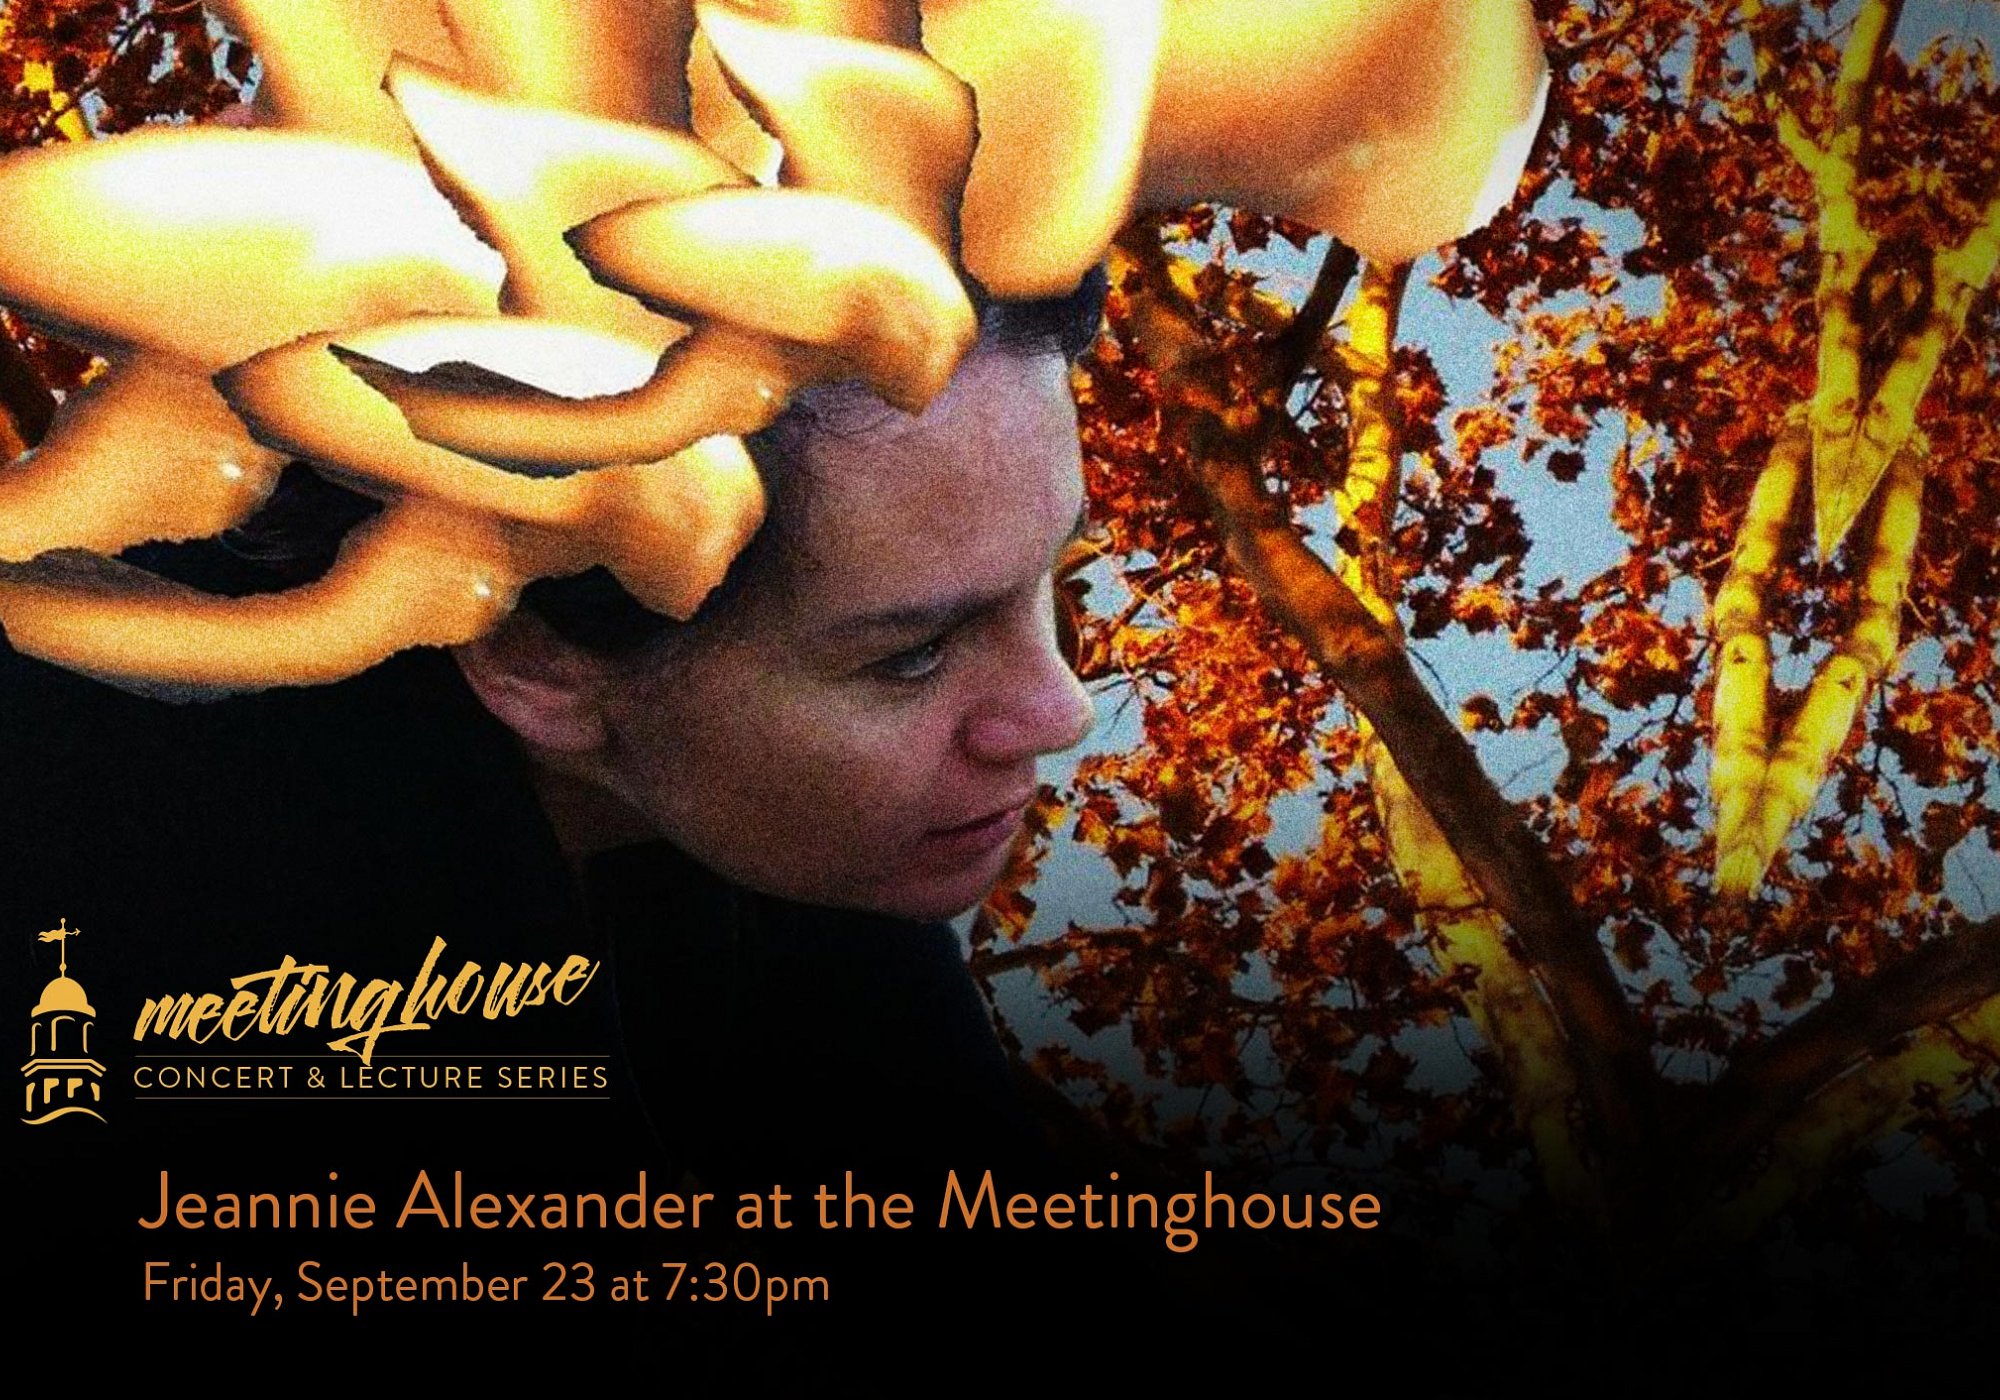 Jeannie Alexander at the Meetinghouse